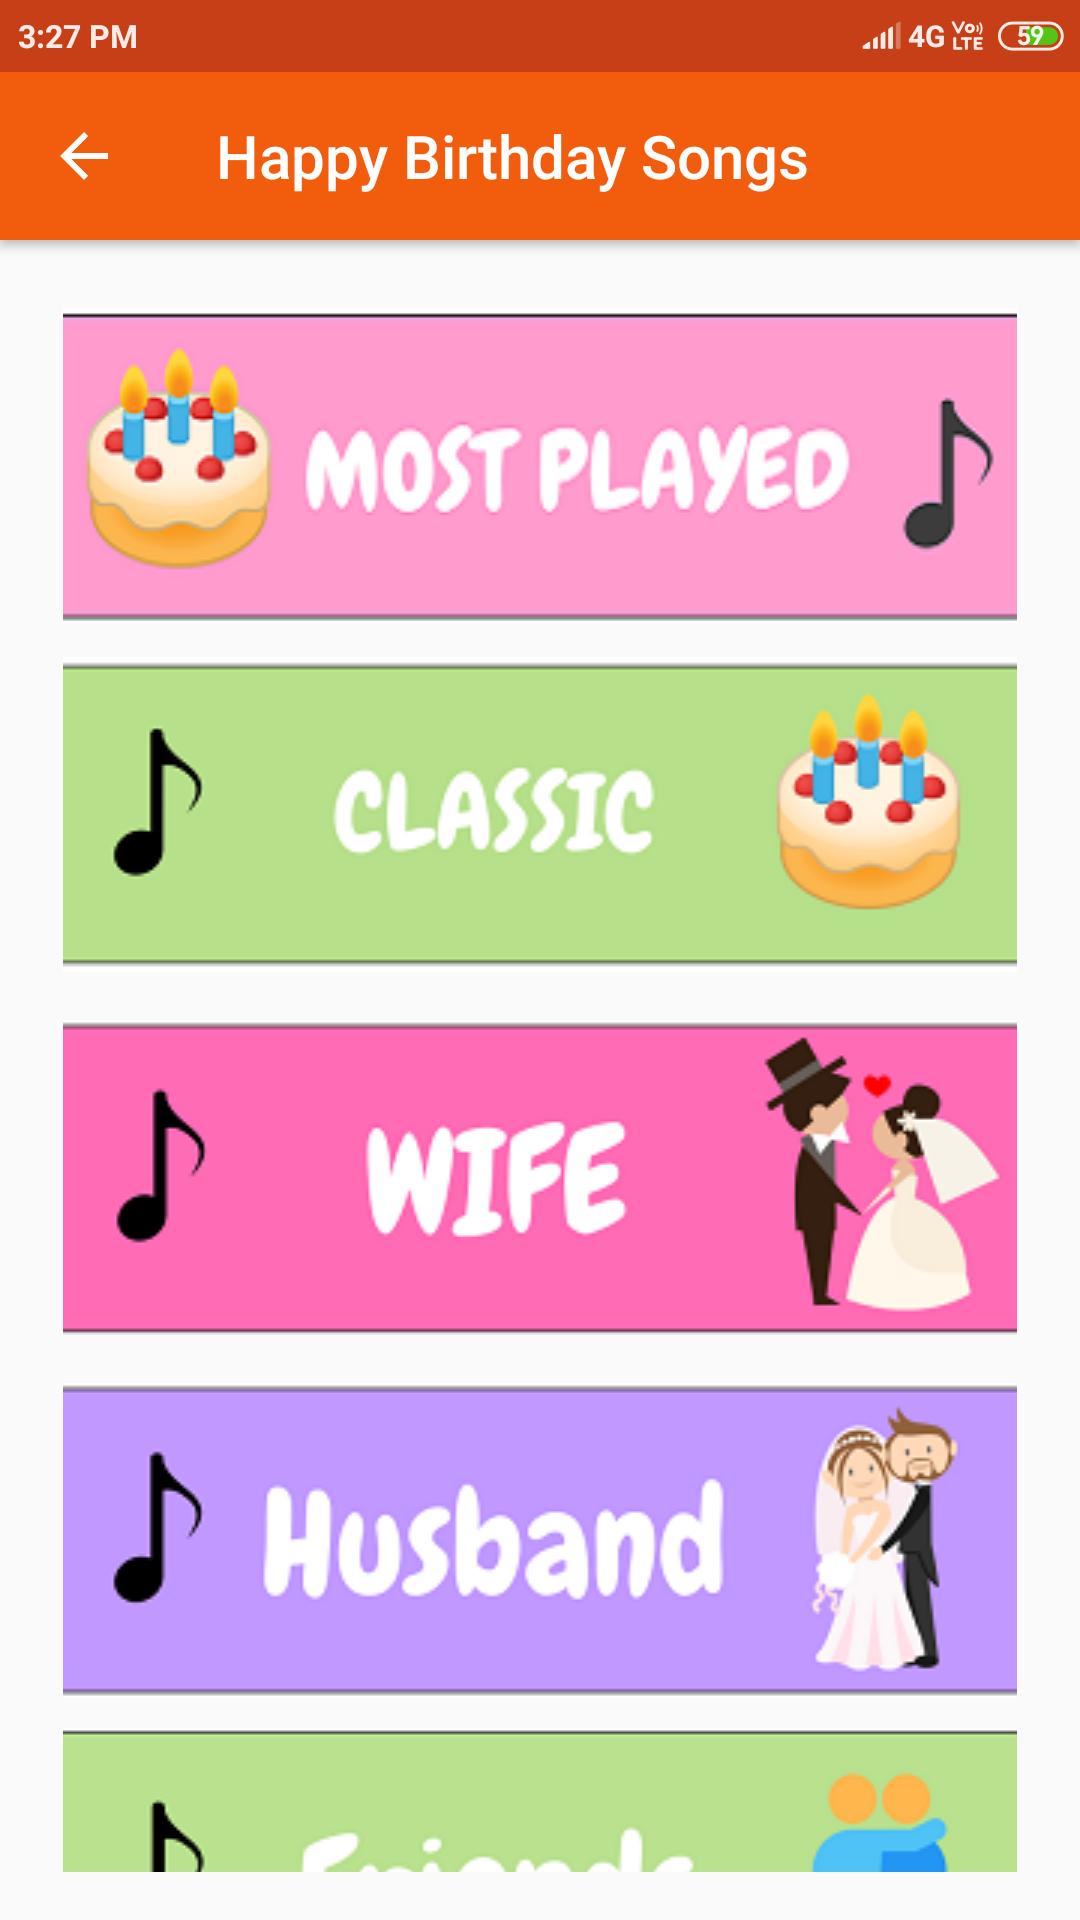 Happy birthday songs mp3 for Android - APK Download